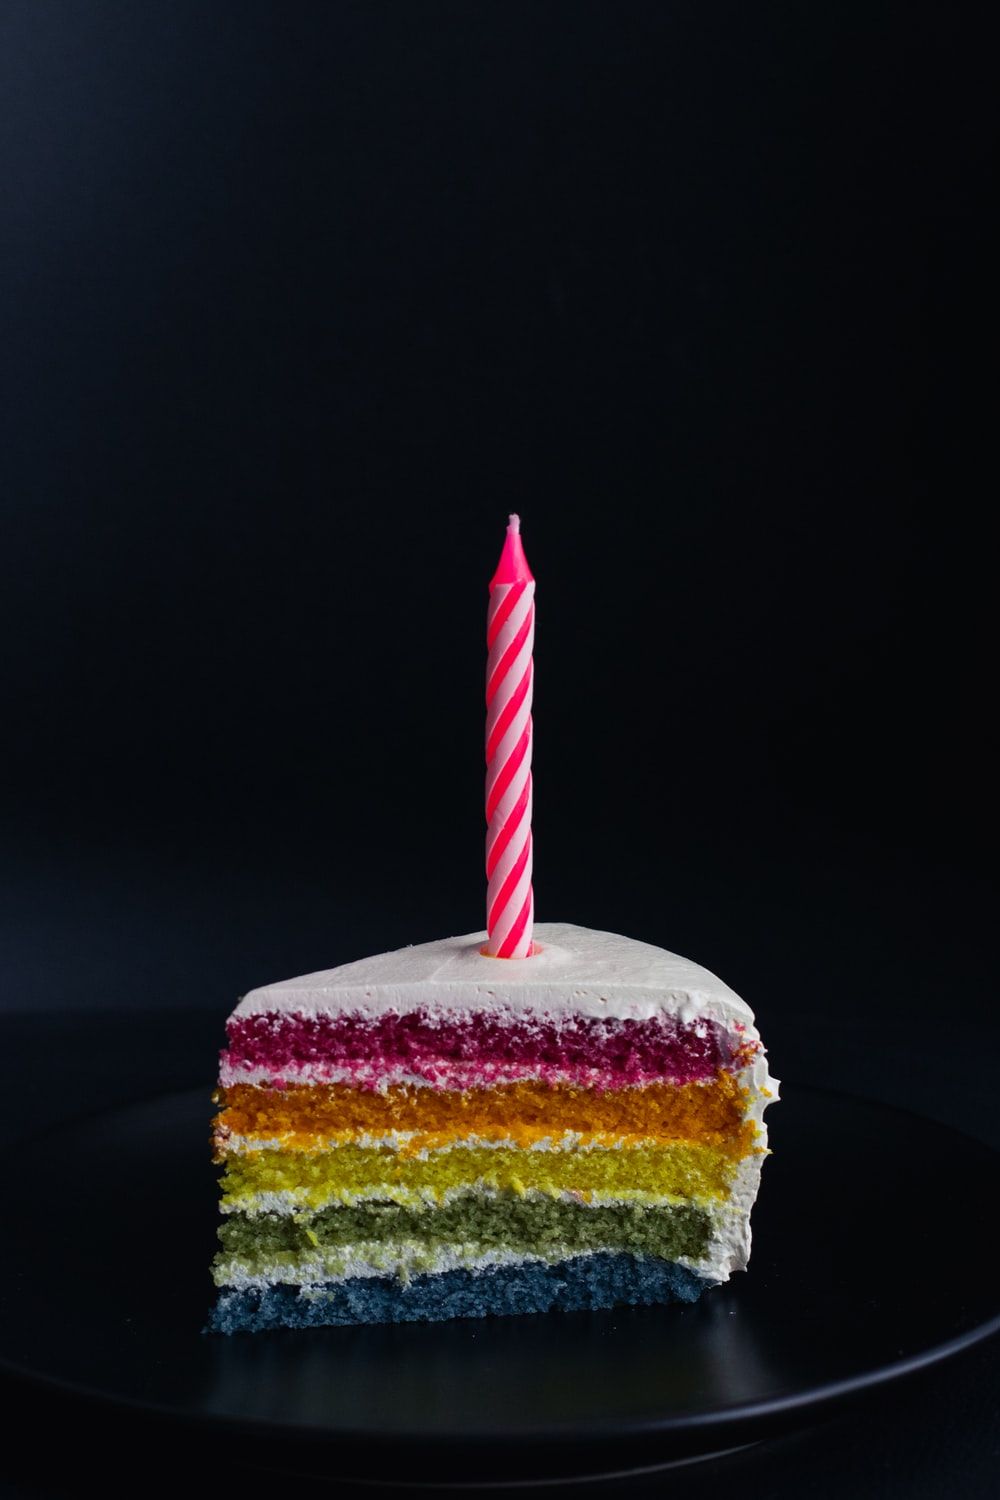 Rainbow Cake Picture. Download Free Image